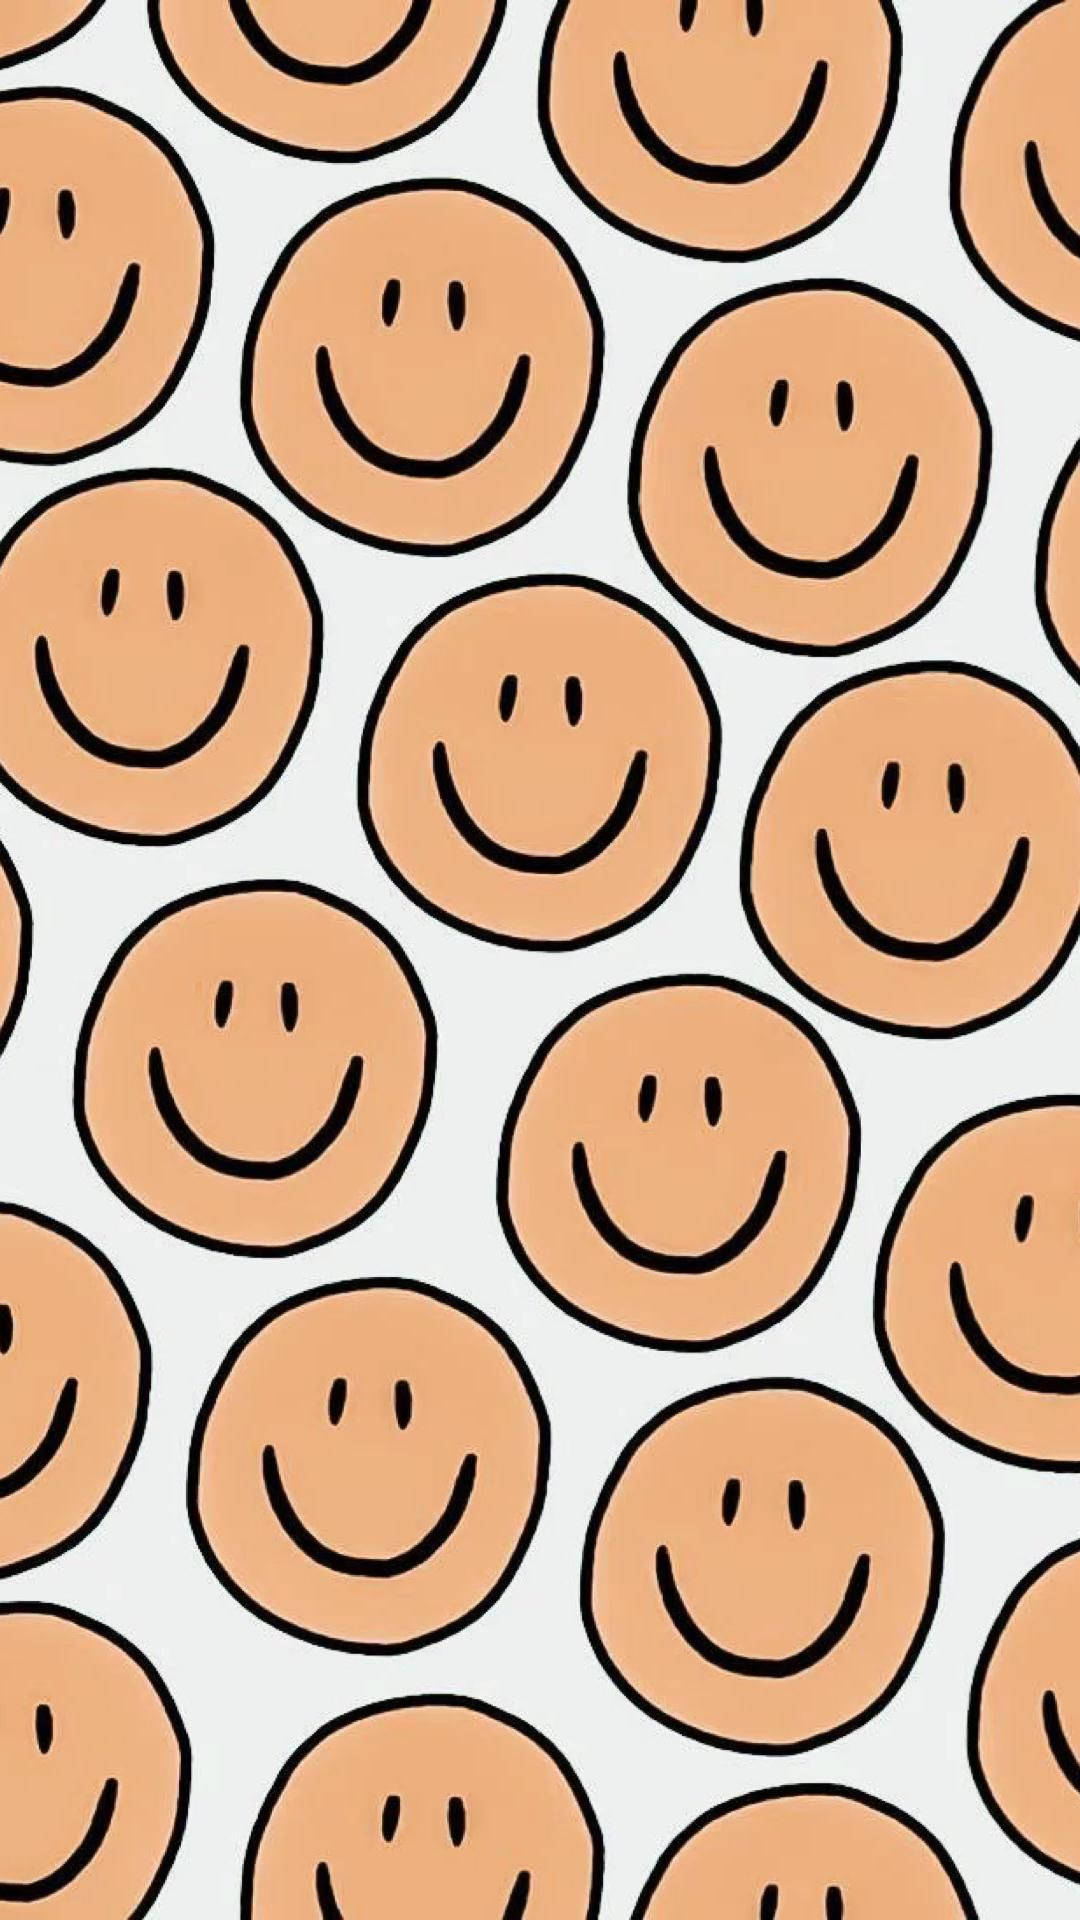 Preppy Smiley Face Equal Pattern Background